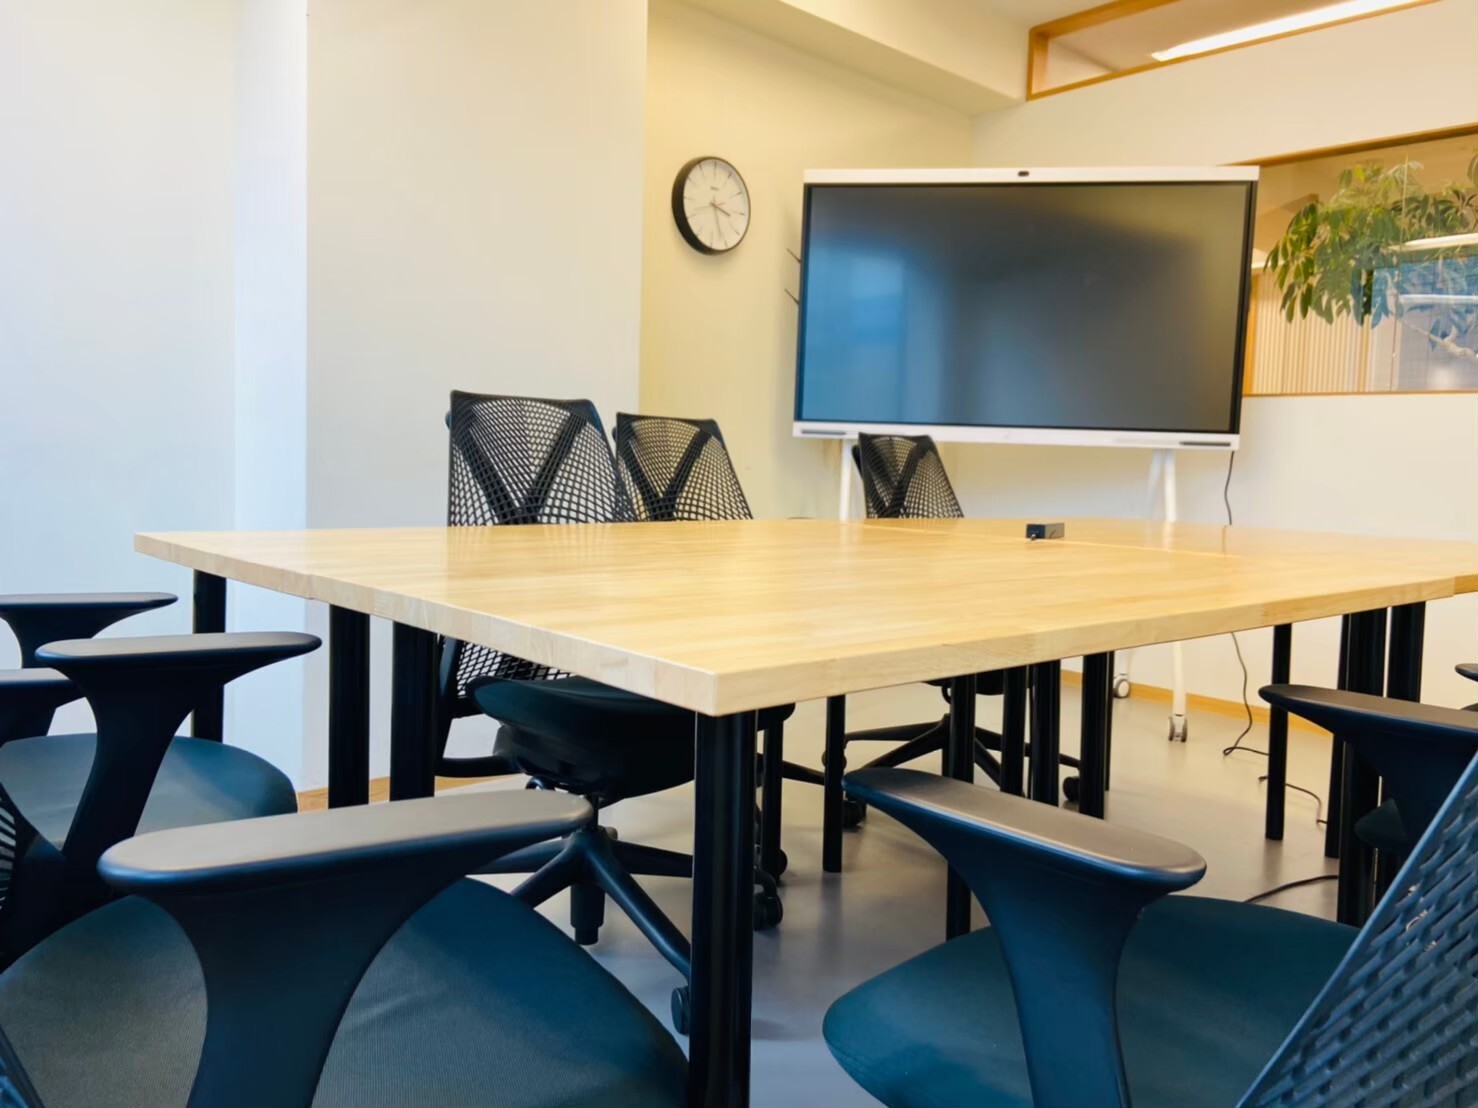 Conference rooms are available for rent.